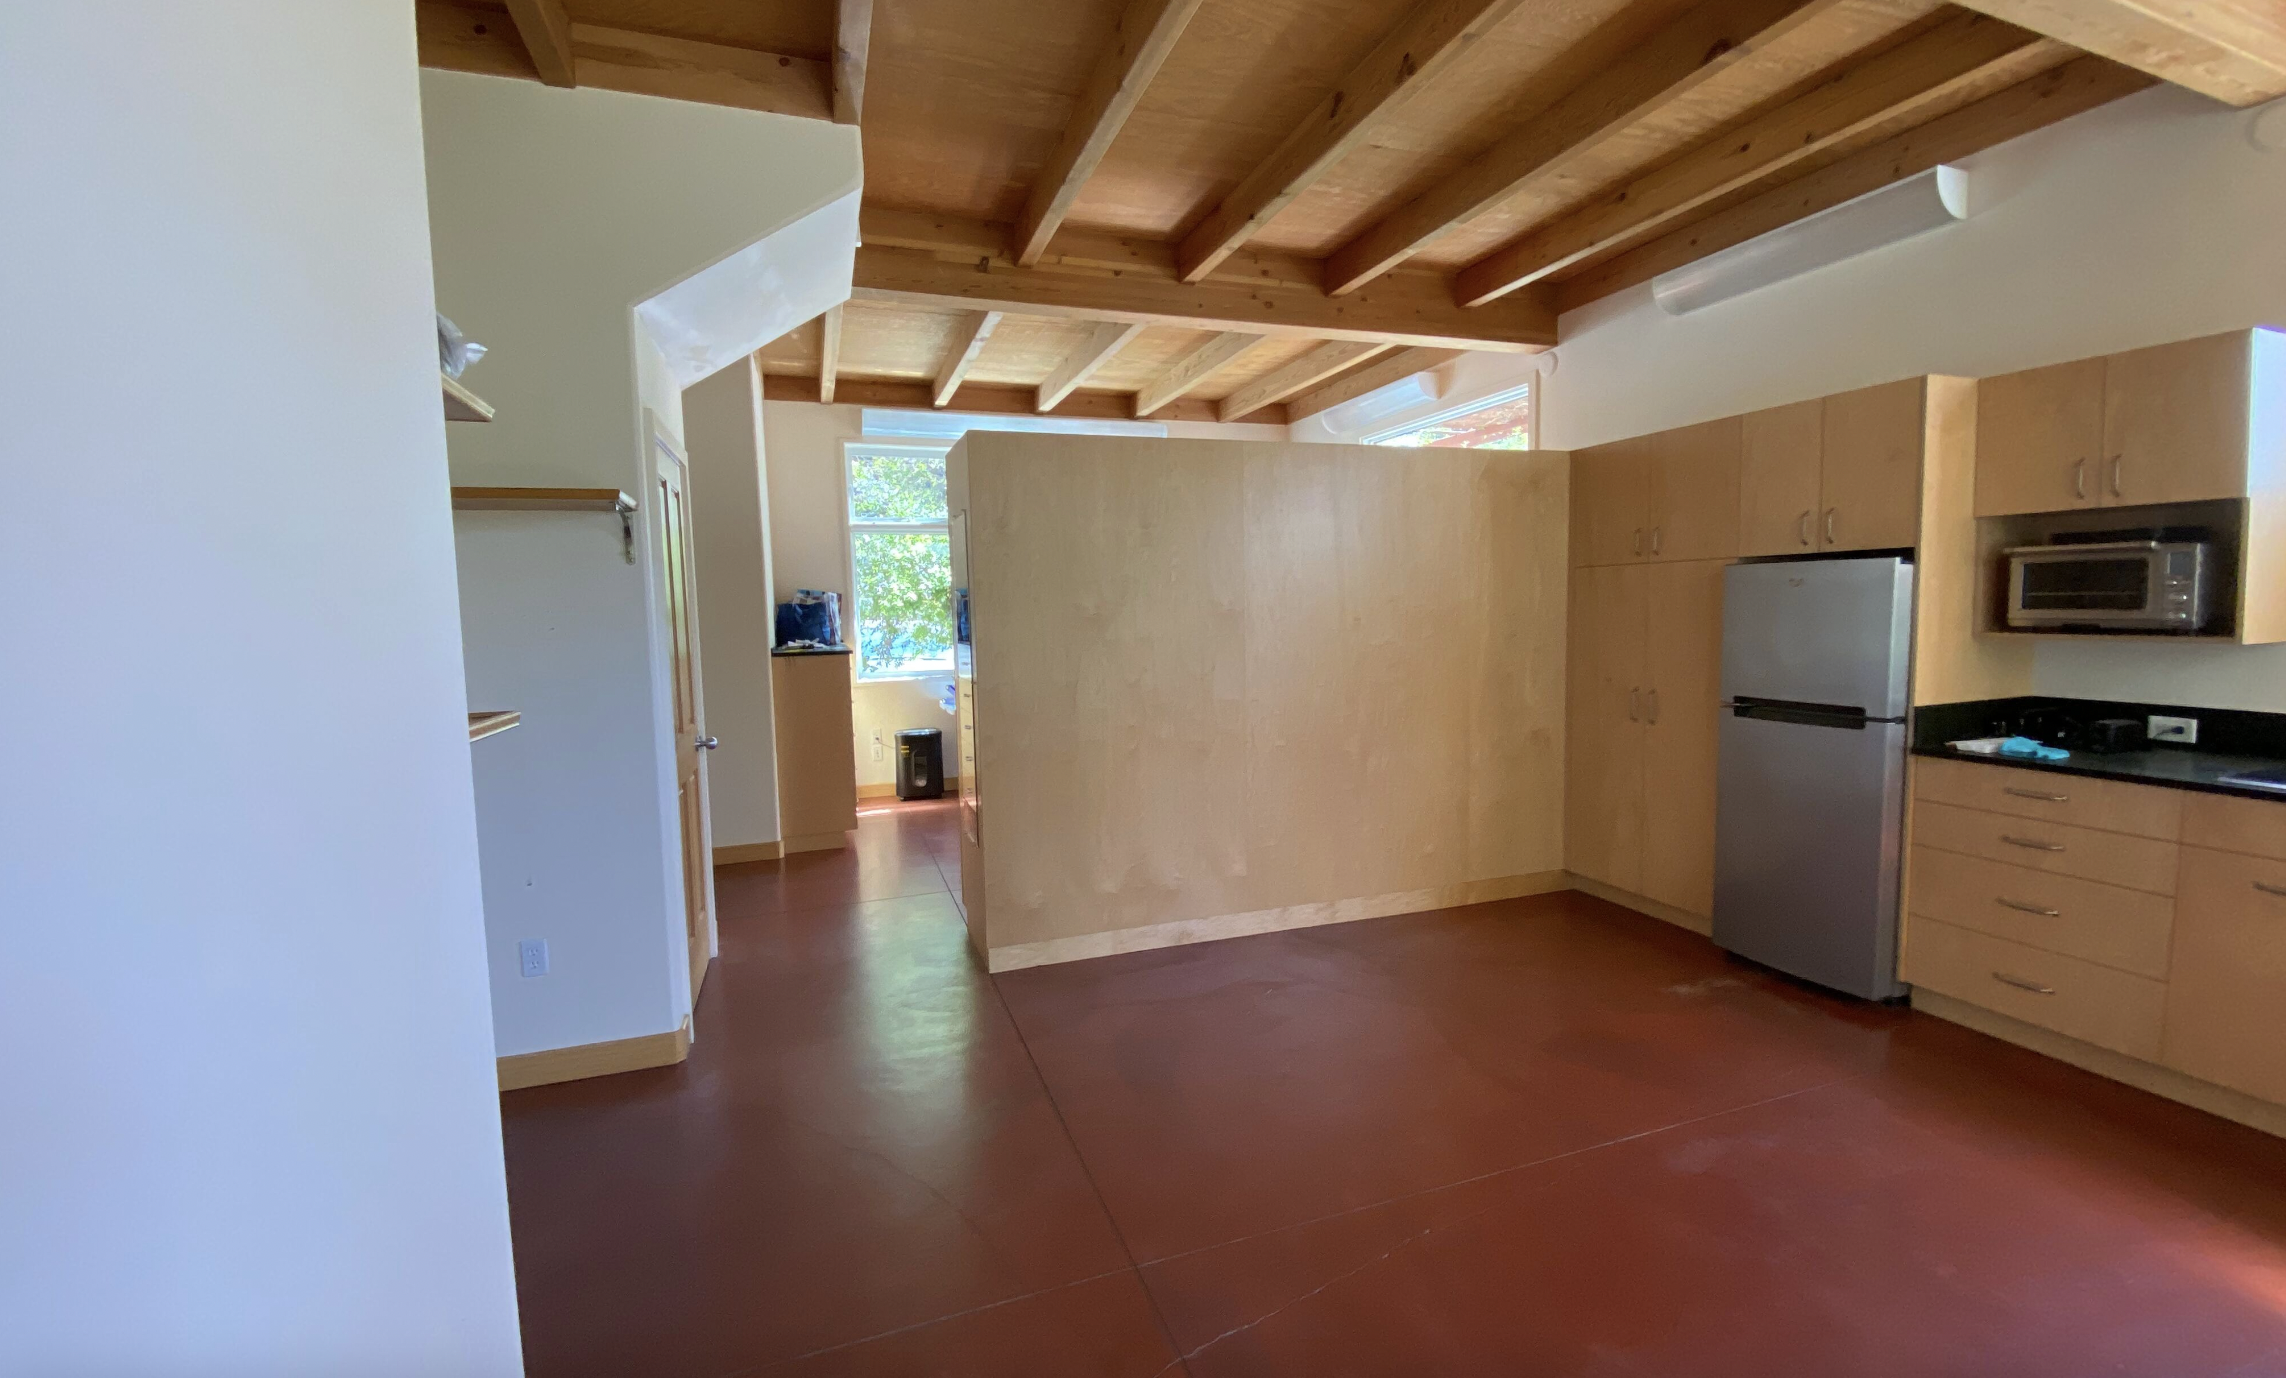  Open kitchen with red concrete floor, light wood ceiling, light wooden cabinets, and a silver refrigerator. There is a wooden partition wall separating the kitchen from an adjoining room with window.  